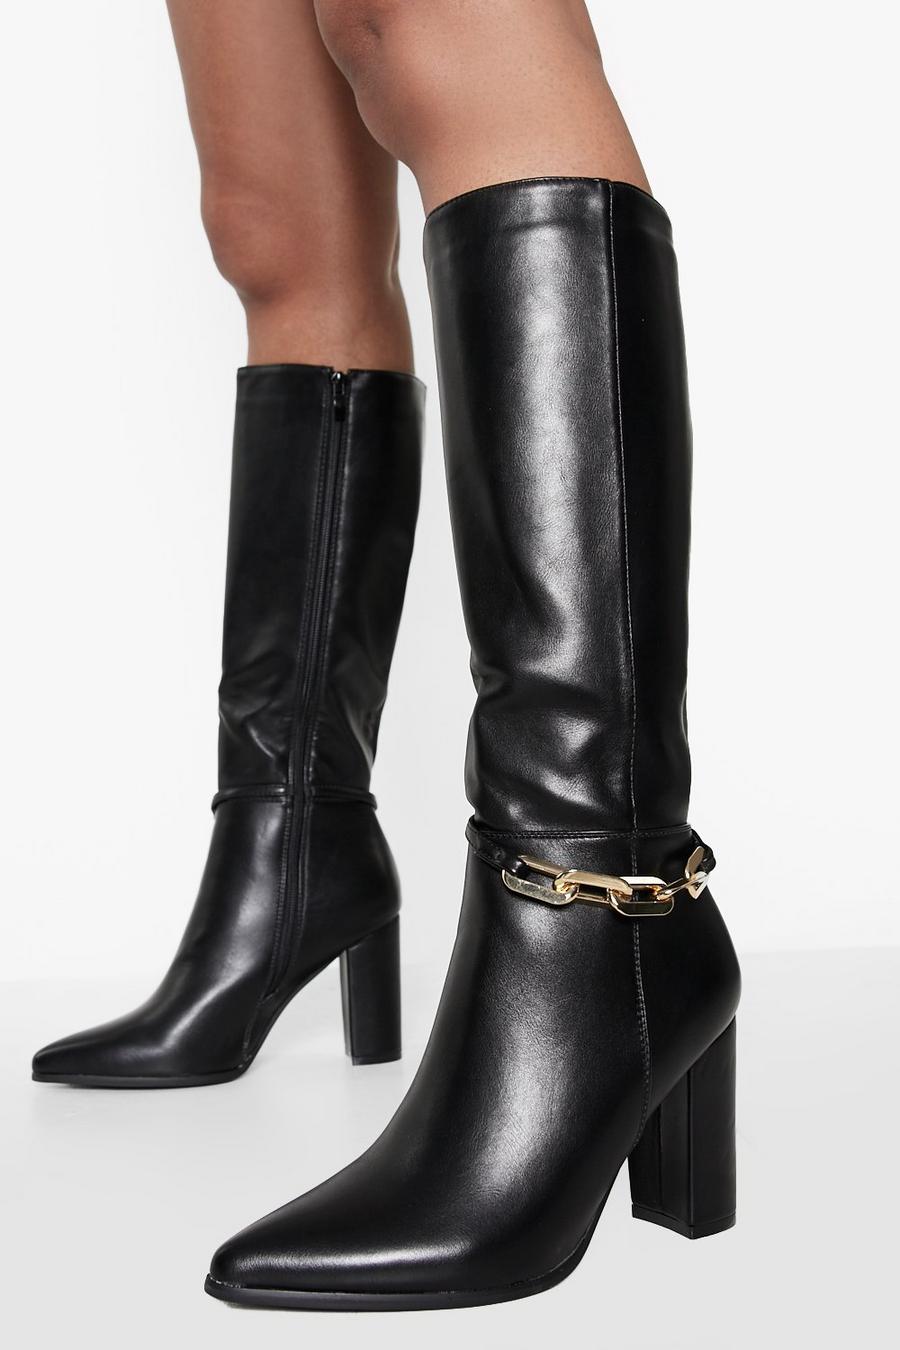 Black Chain Detail Heeled Knee High Boots